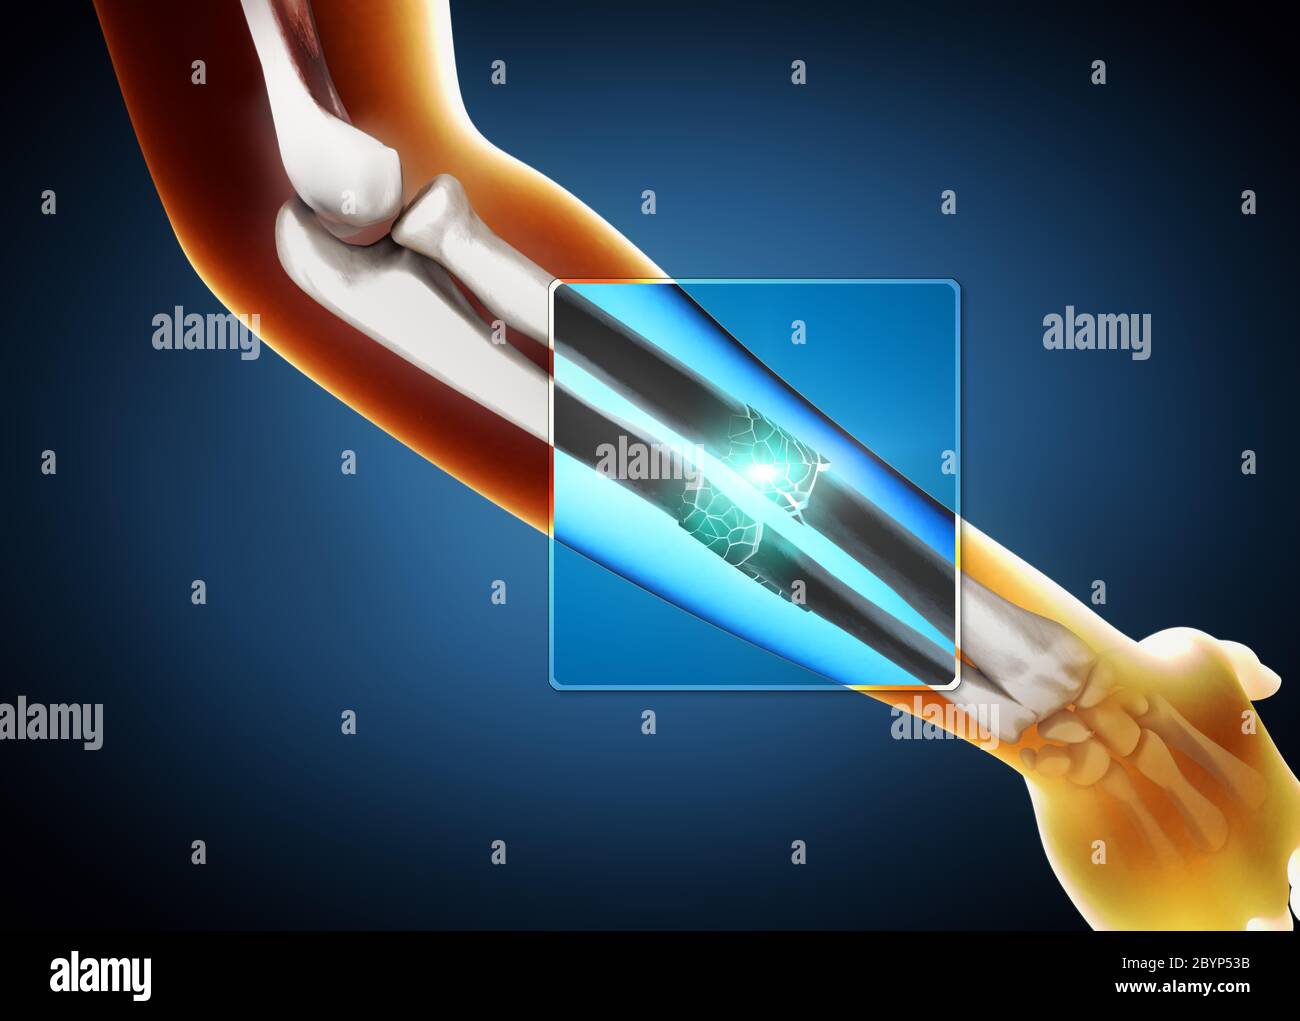 3d illustration of a x-ray image of a broken ulna and radius bone Stock Photo